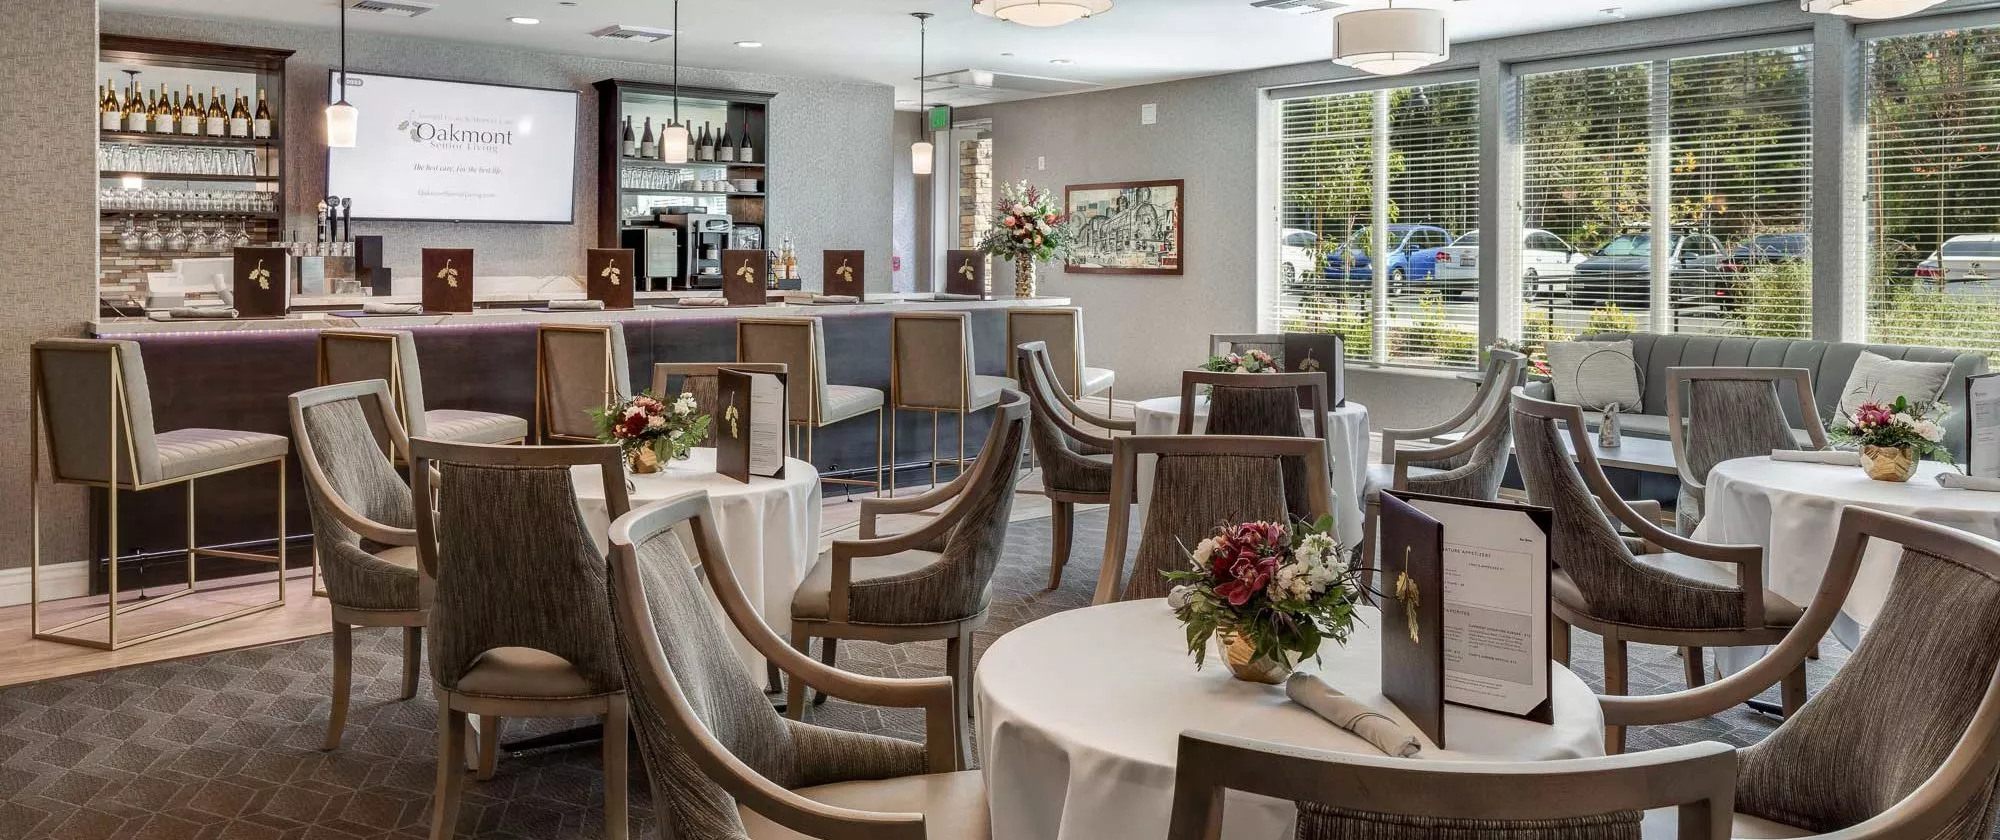 Agoura Hills bar and dining room